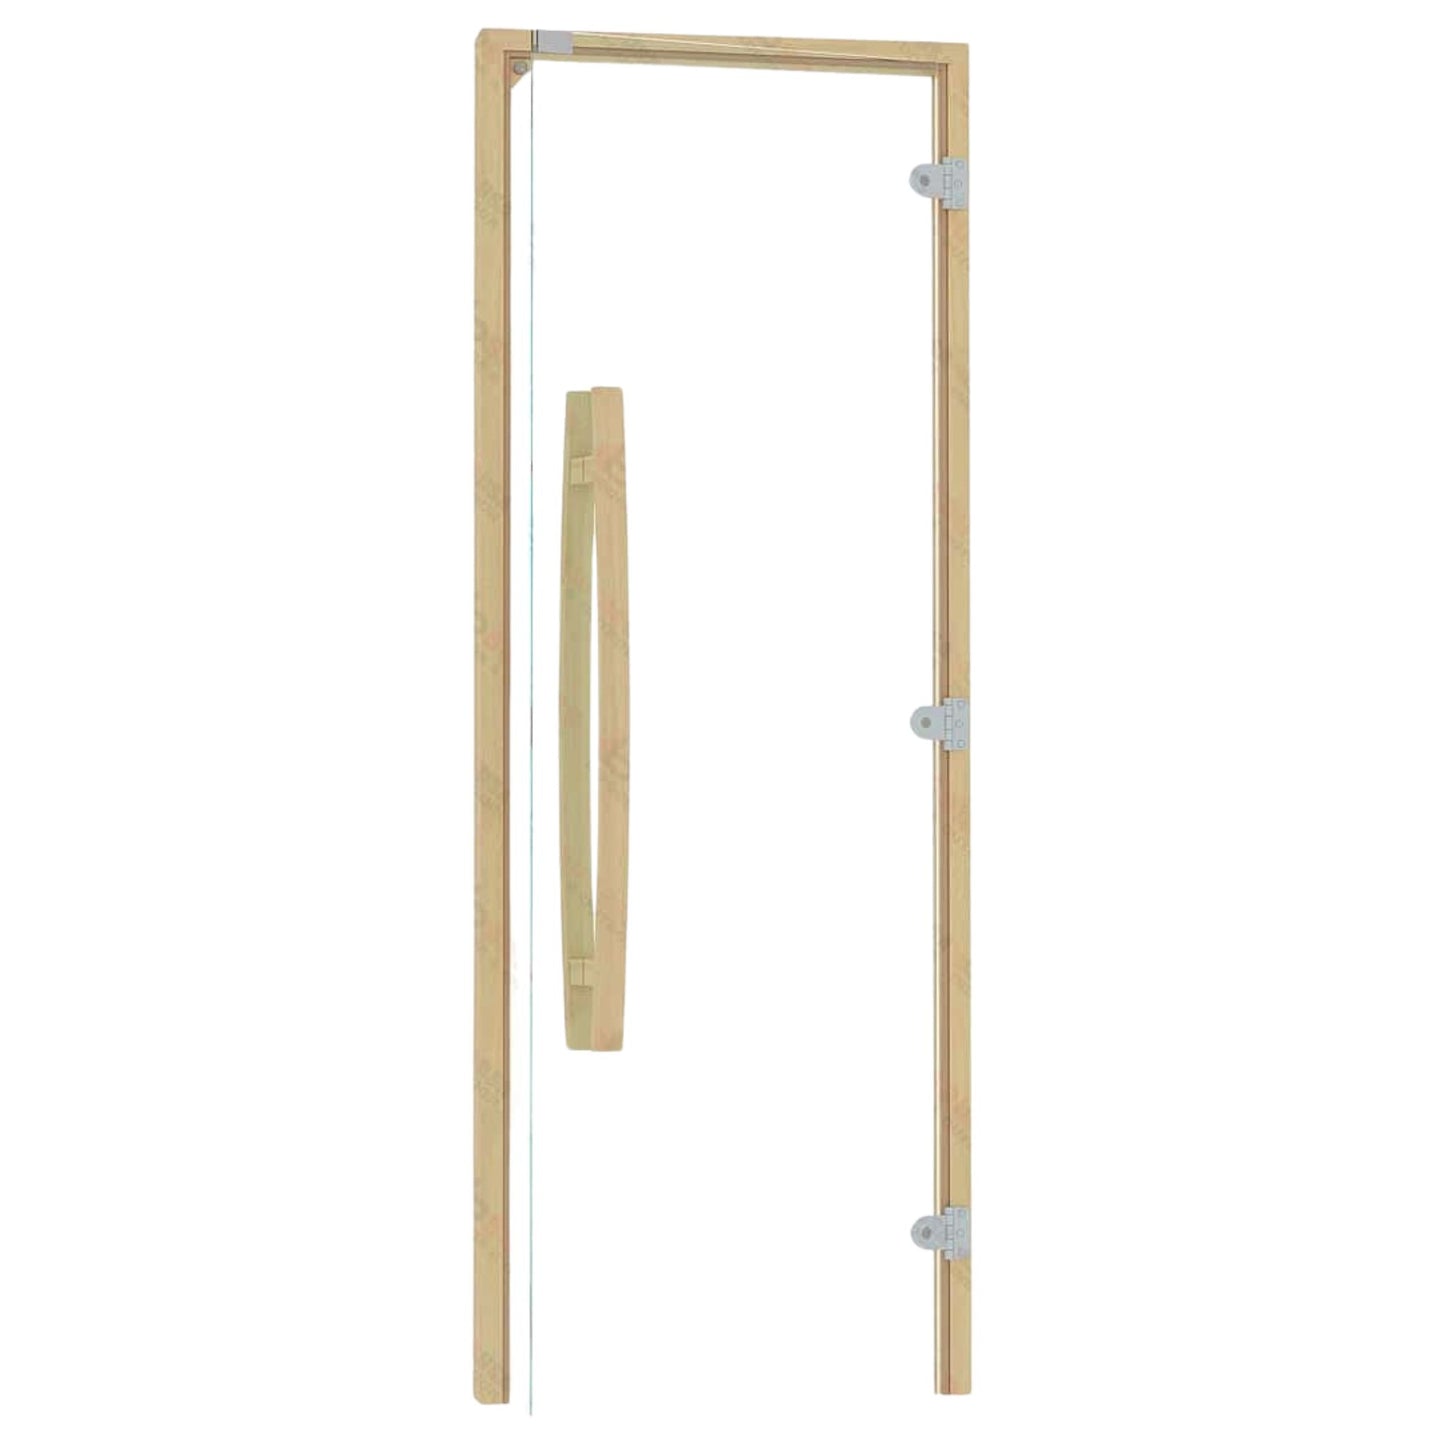 Right side clear sauna door frame